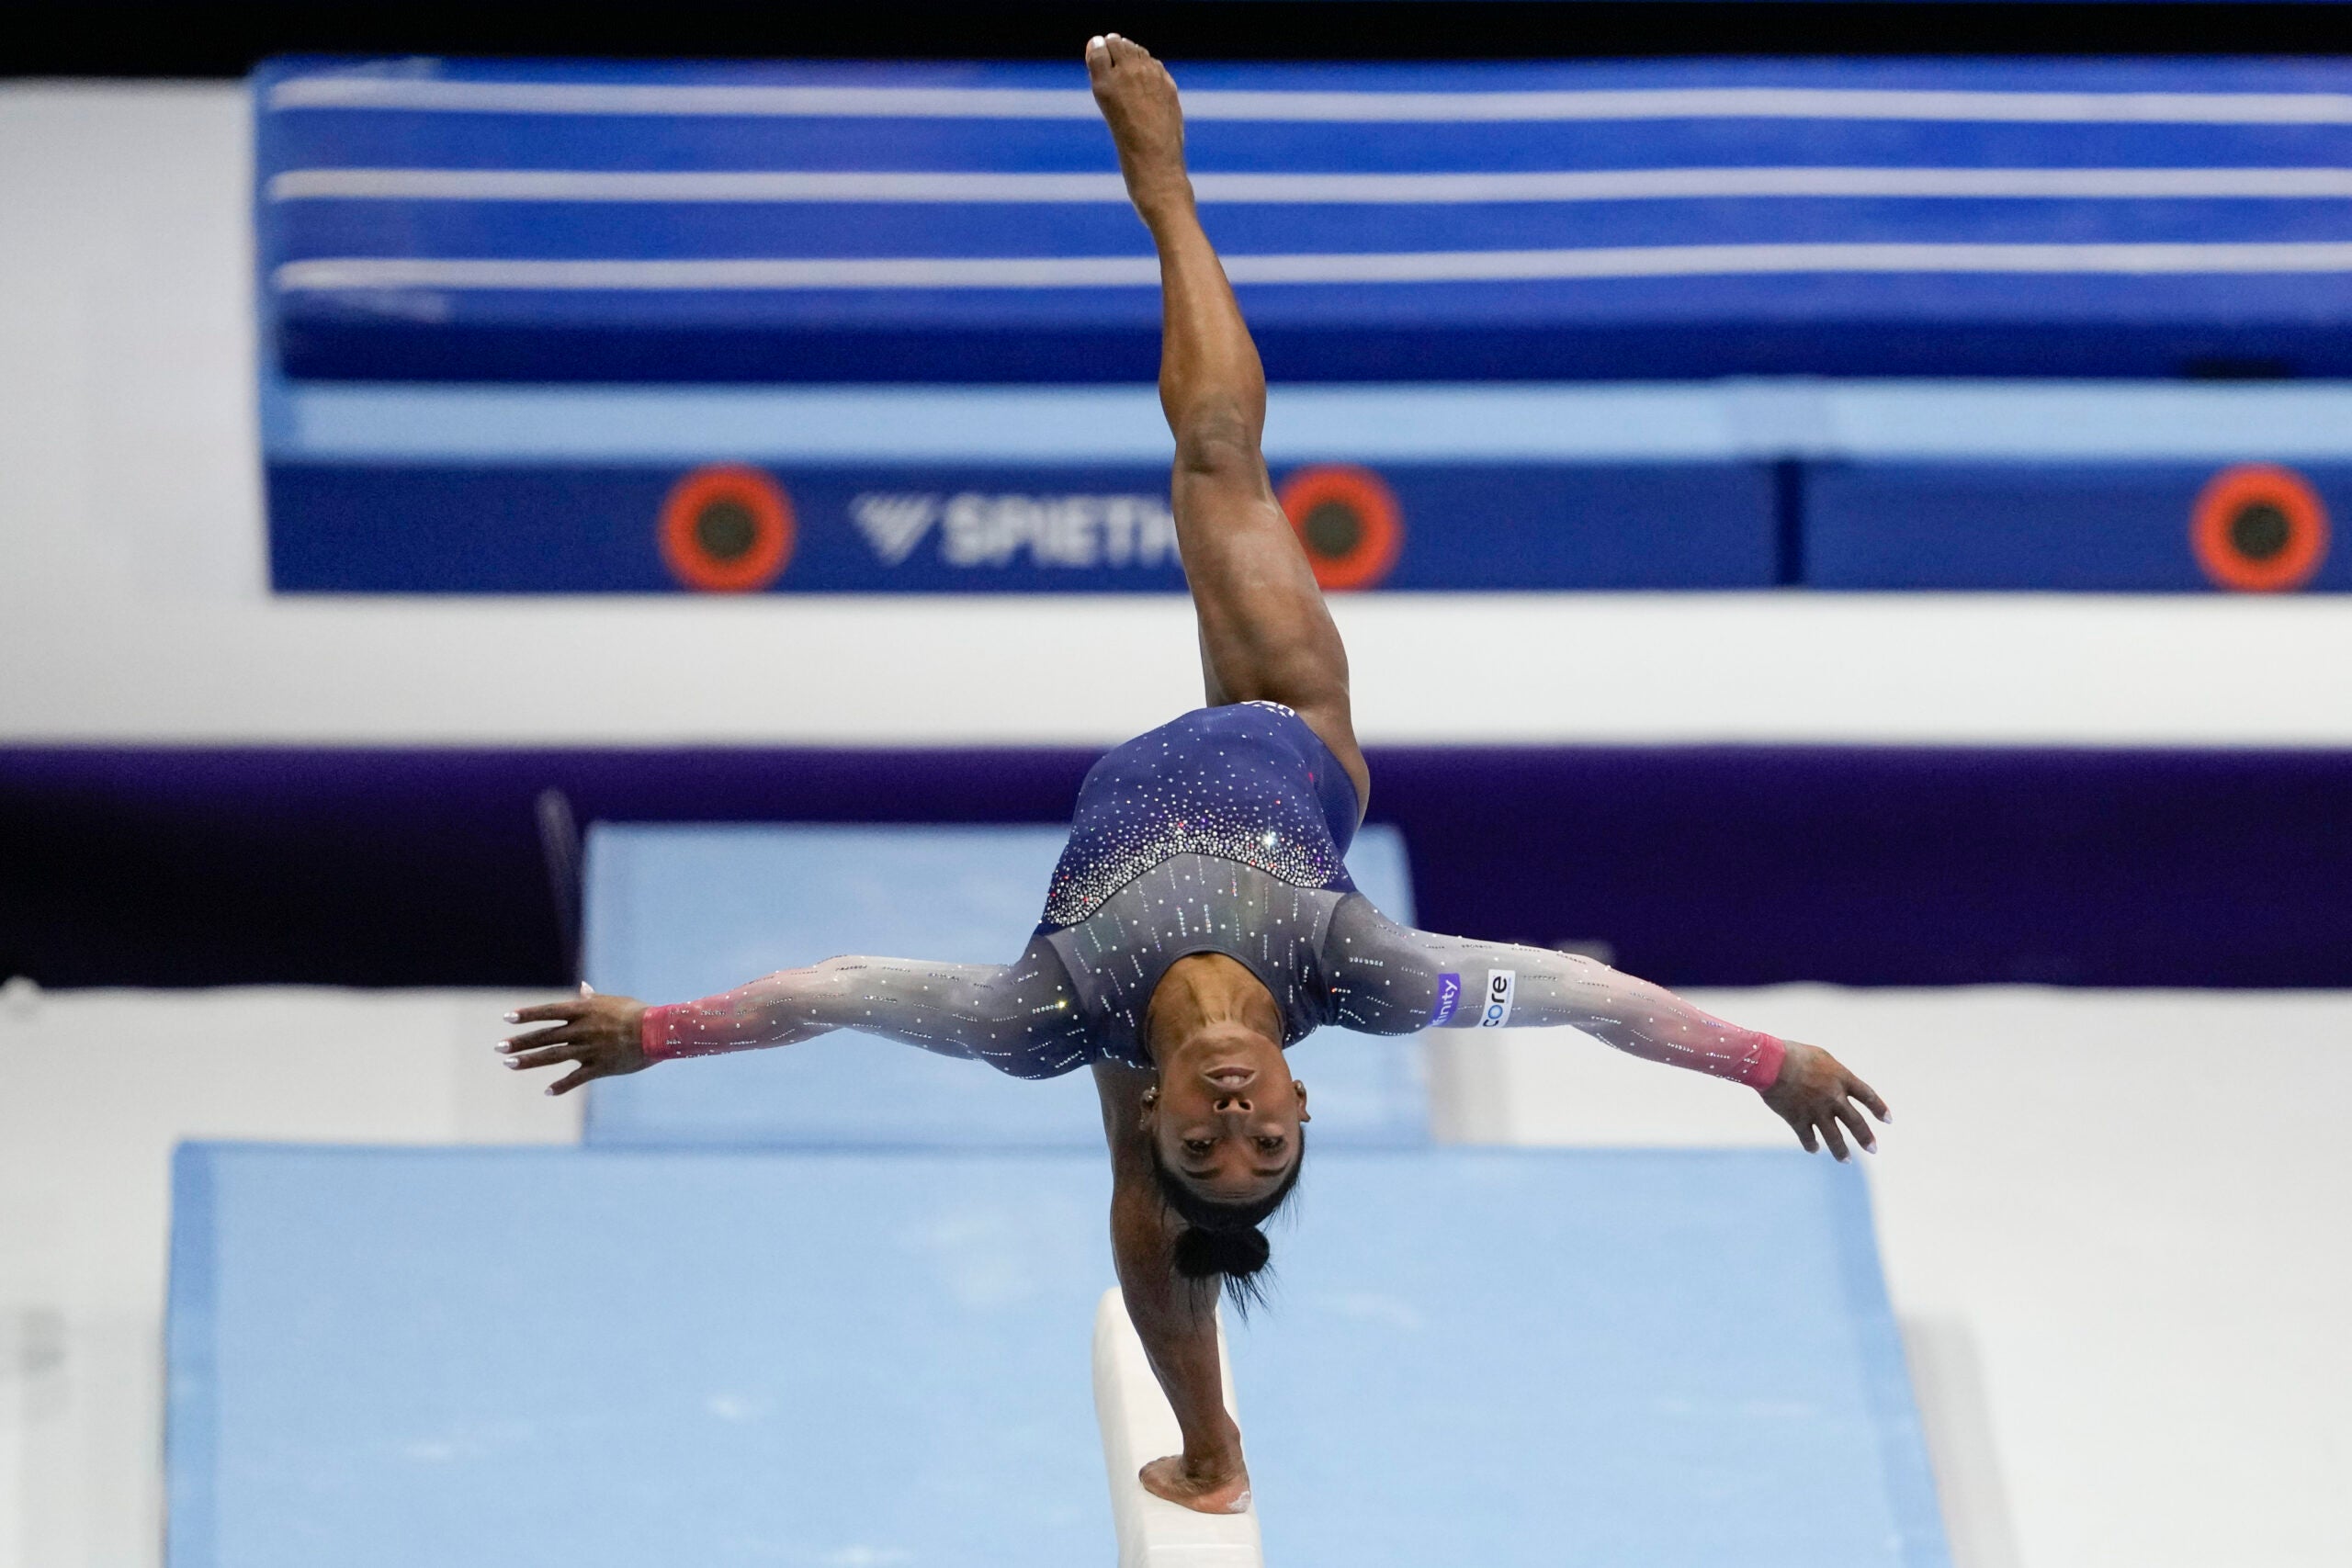 United States' Simone Biles competes on the beam.